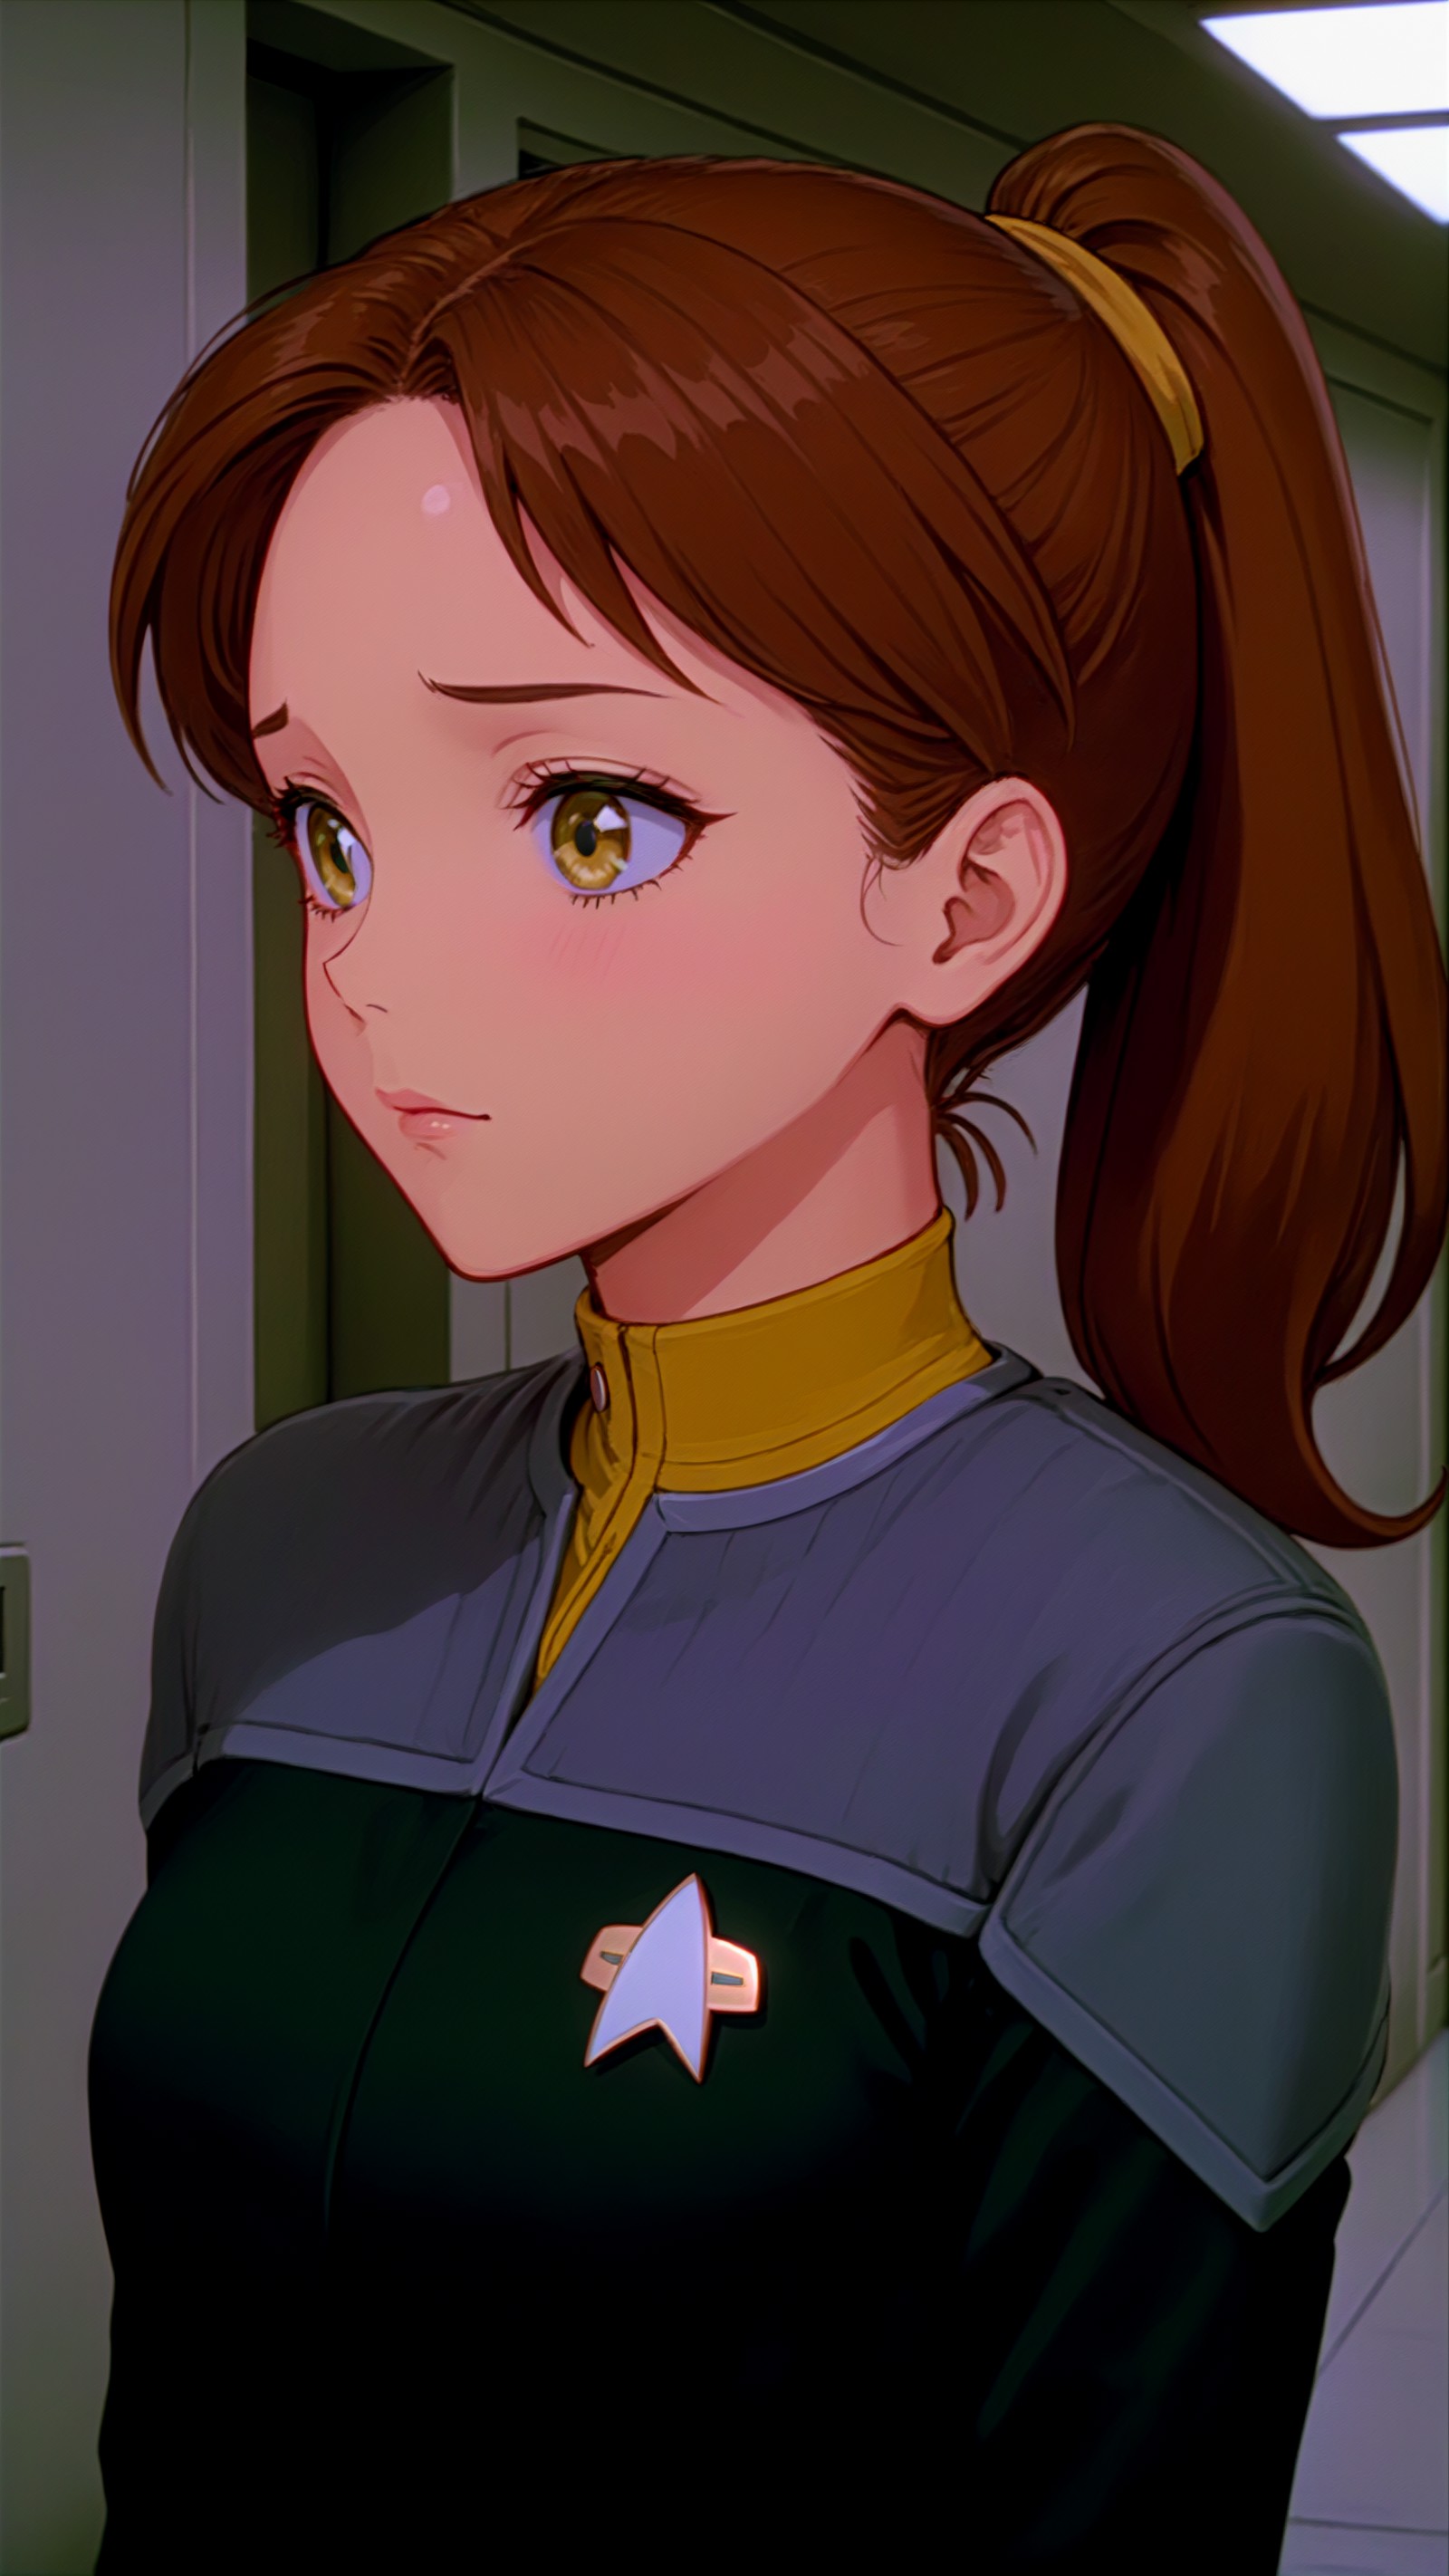 black and grey ds9st uniform,yellow collar,A anime screenshot,latino woman,brown hair,ponytail,in a hallway,<lora:DS9XLVGR...